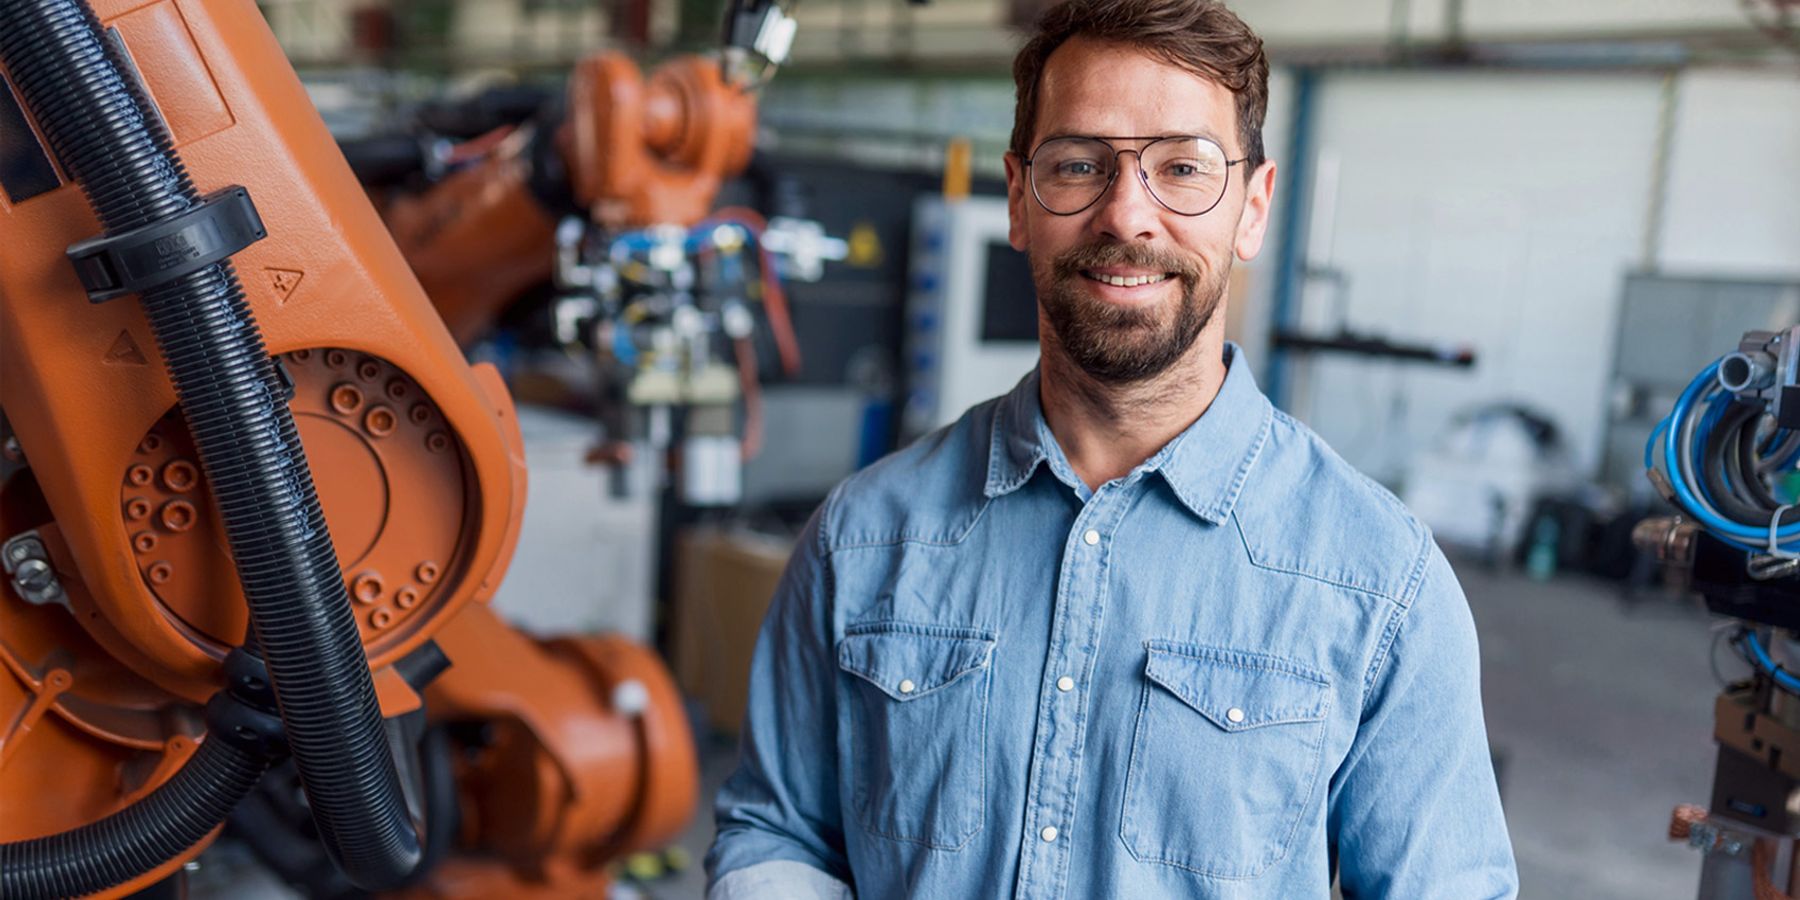 Build power skills everyone needs for success in manufacturing